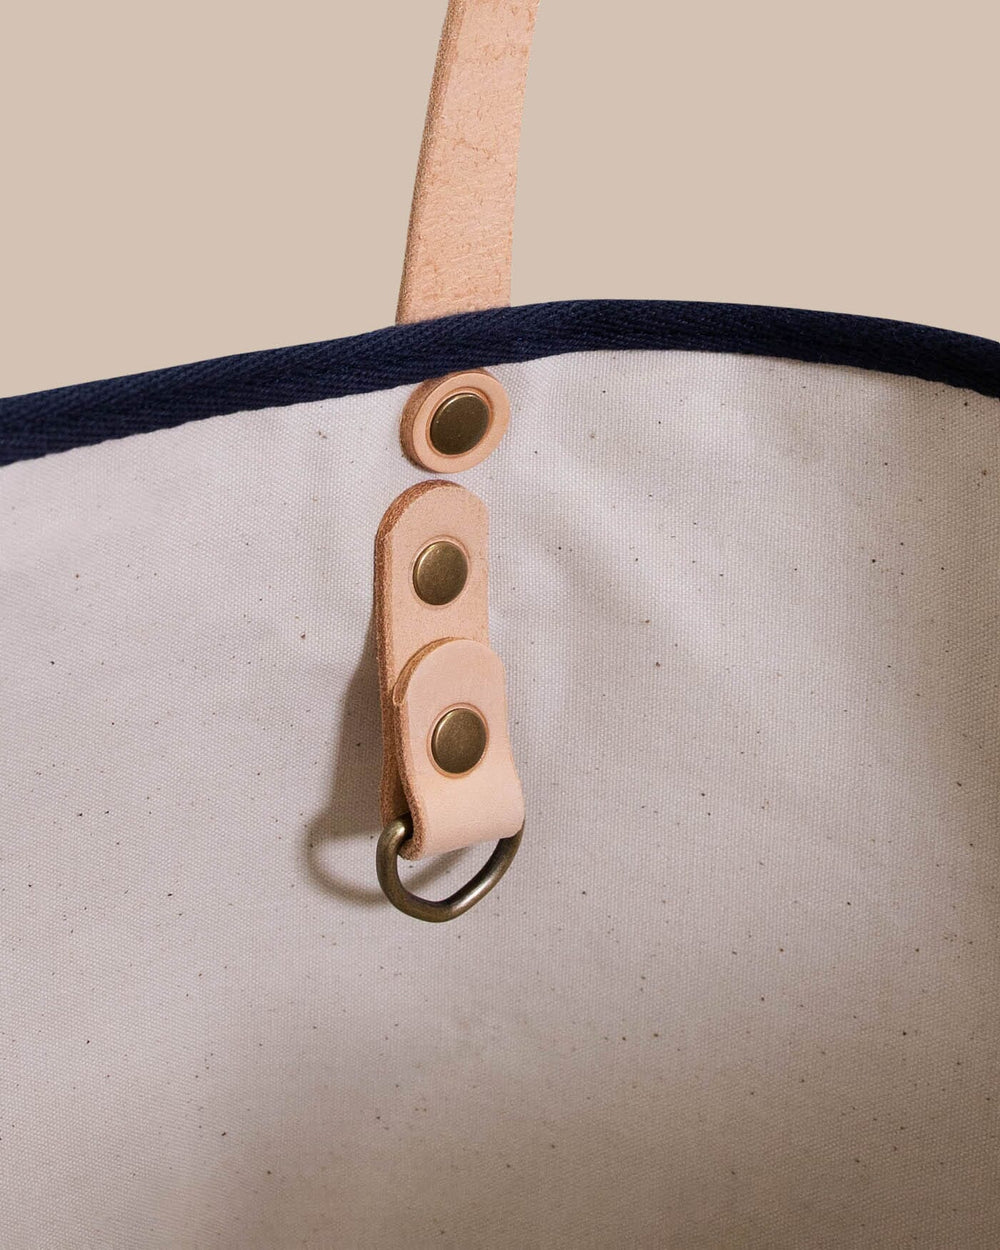 The detail view of the All Day Denim Tote by Southern Tide - Navy